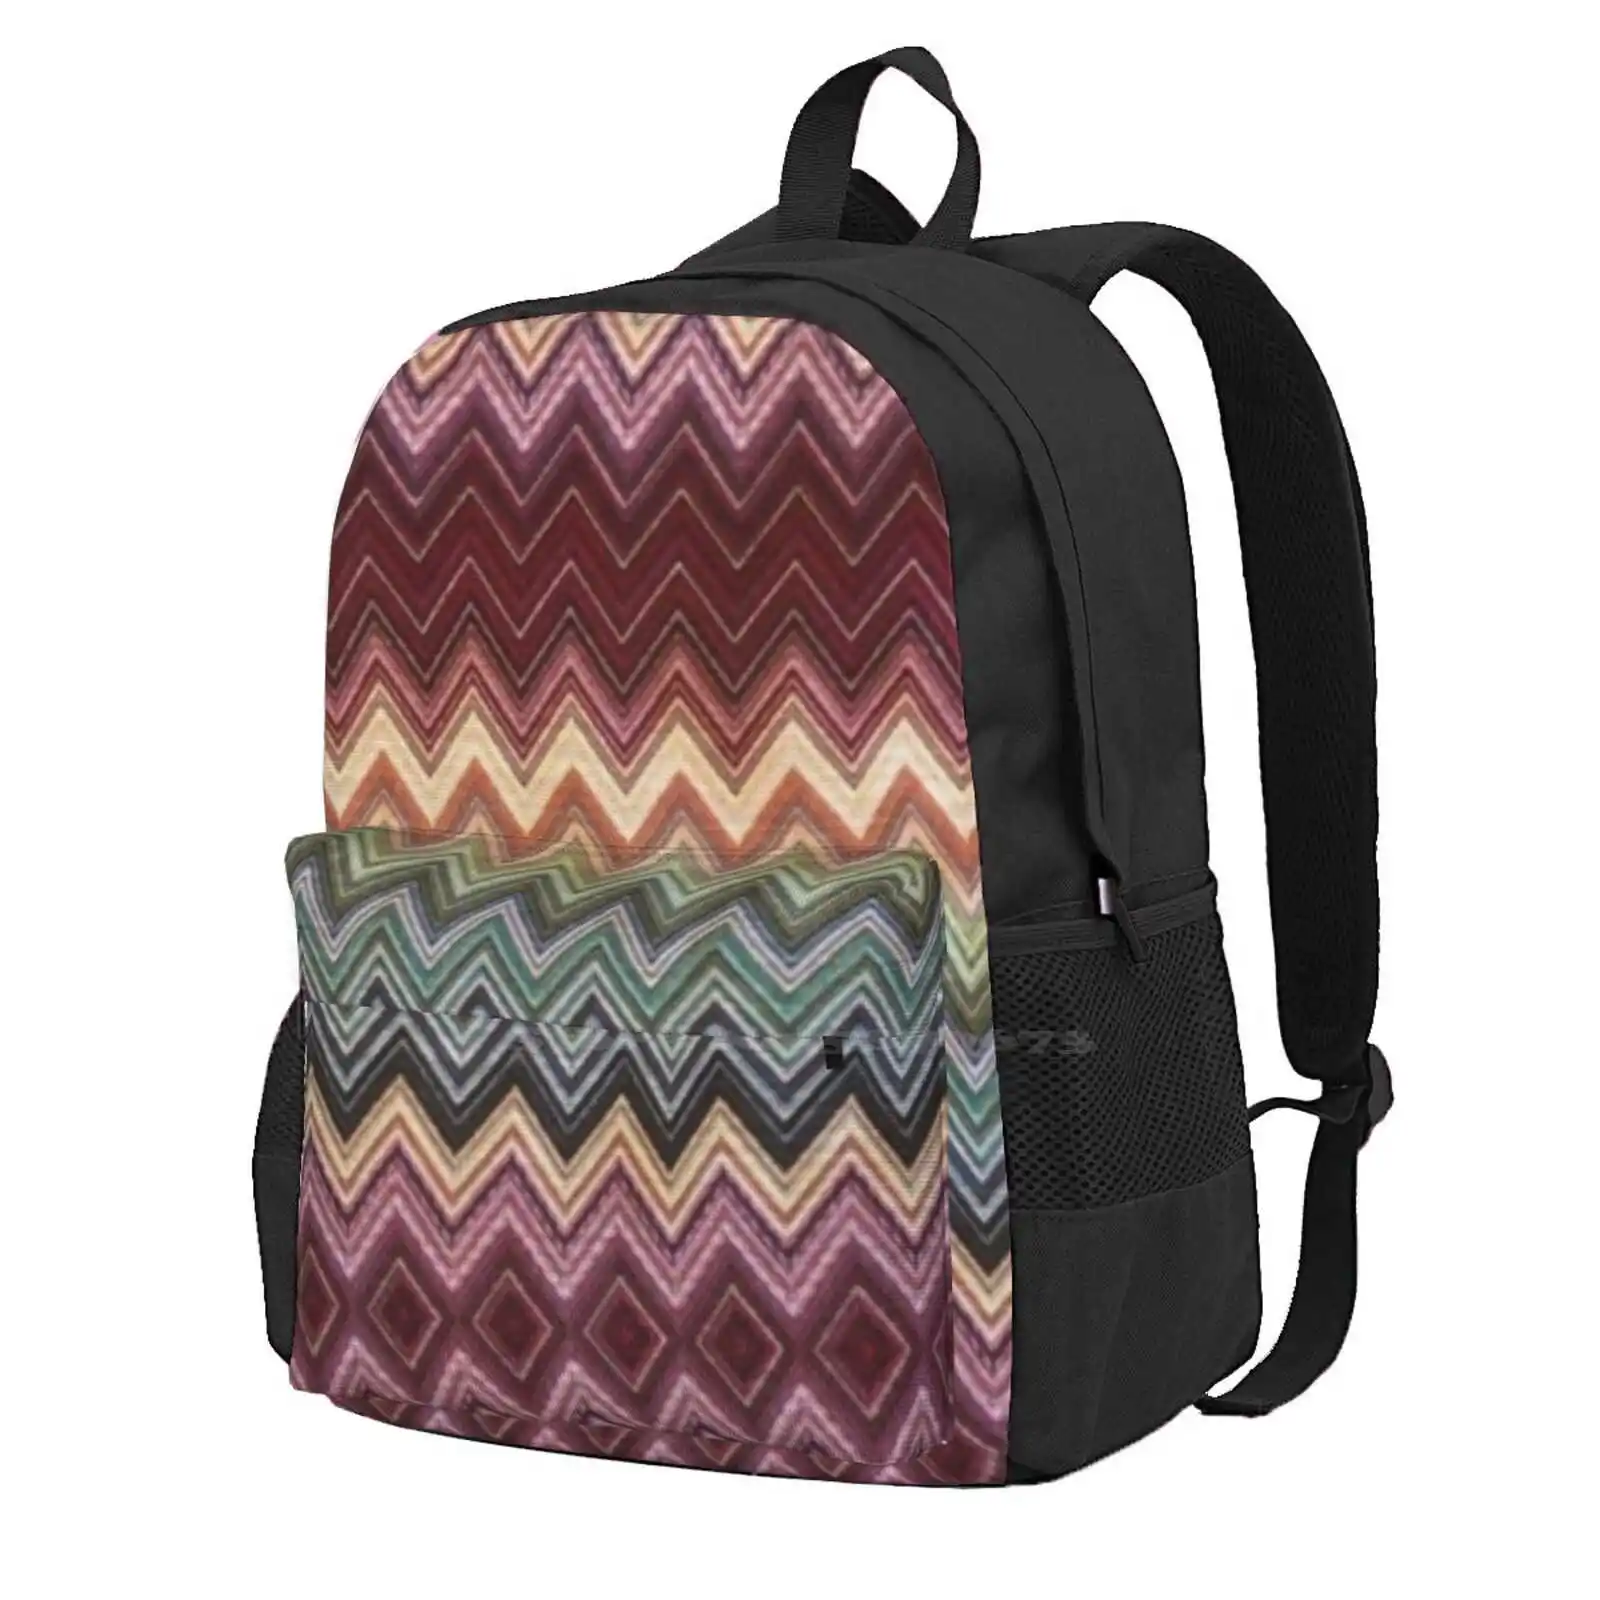 

School Bags Travel Laptop Backpack Home Boho Abstract Color Fashion Geometric Ivory Modern Pastel Textile Vintage Zigzag Chic